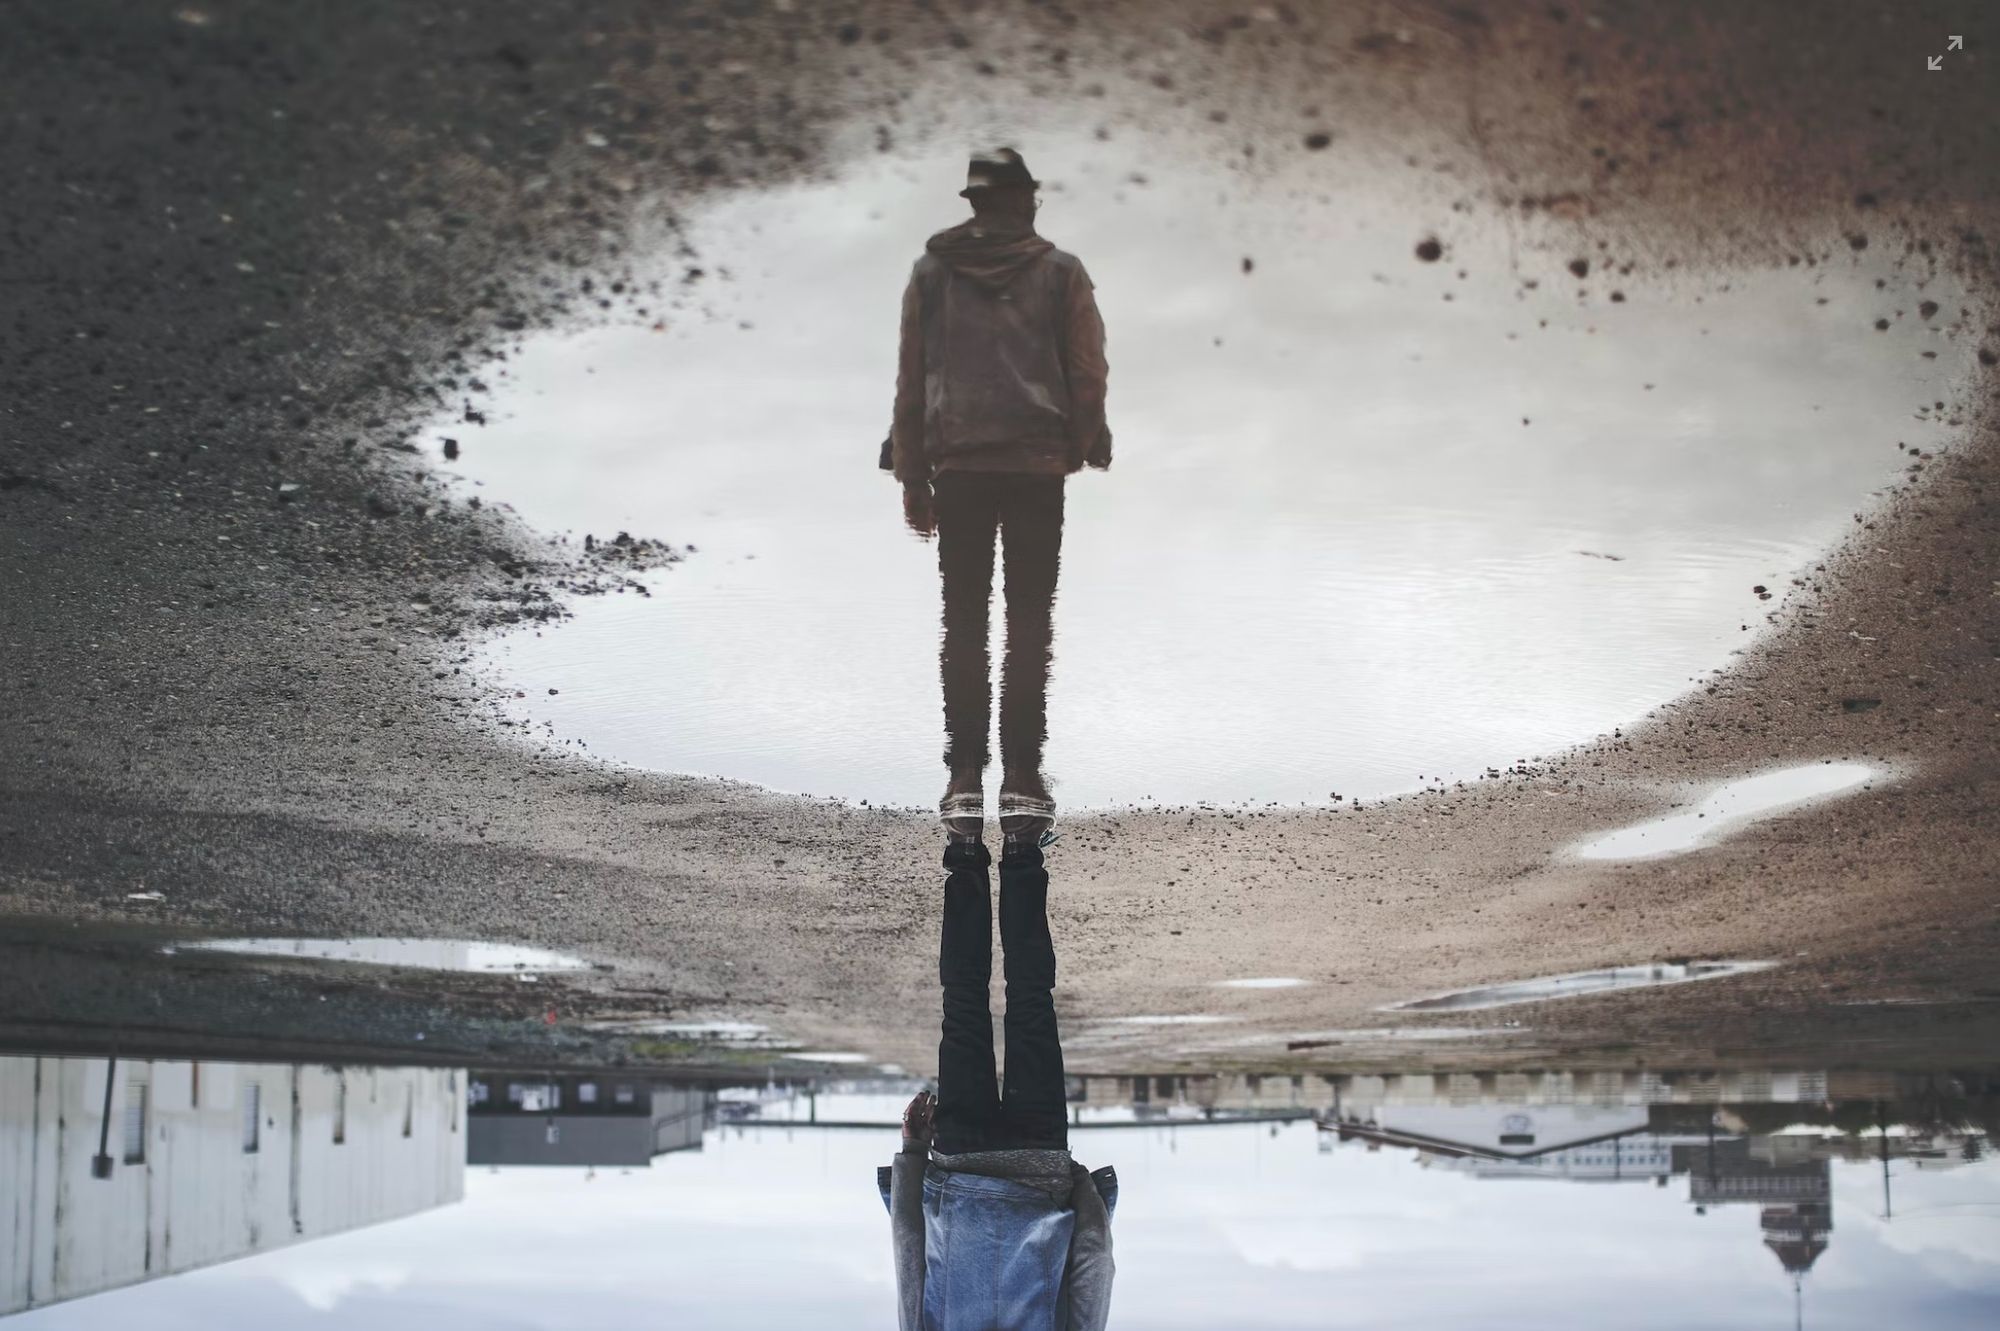 Photo of a man's reflection in a puddle. The reflection shows he's wearing a hat and coat. He stands near a warehouse